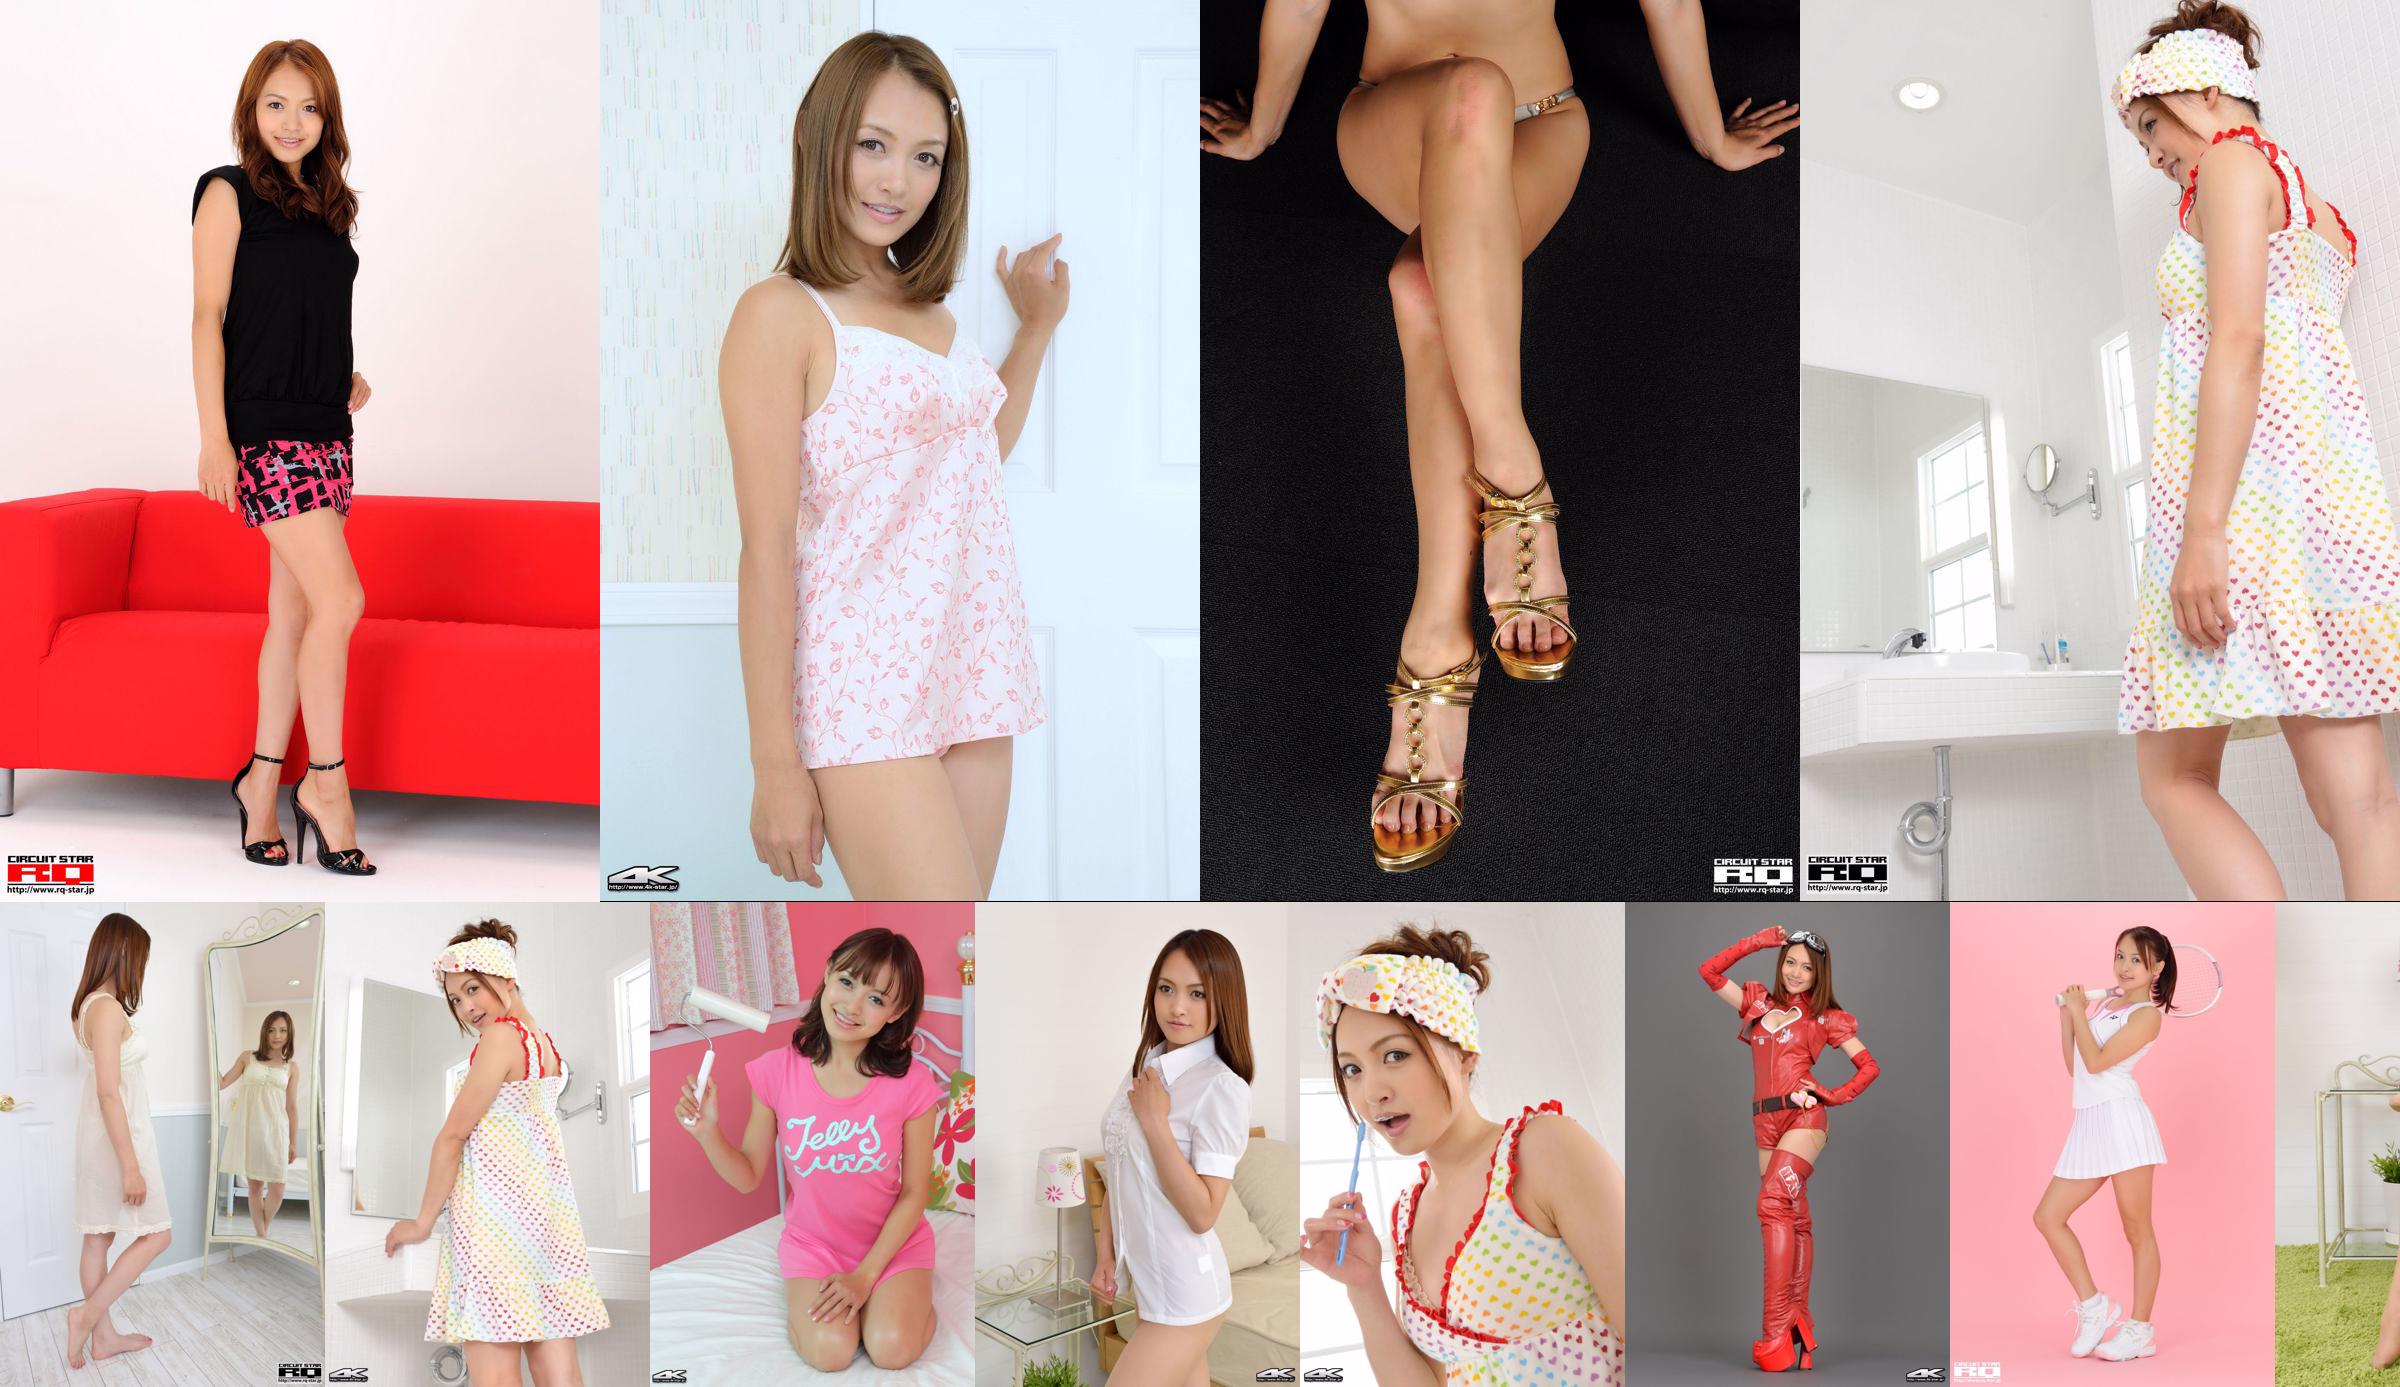 [RQ-STAR] NO.00358 伊東りな Private Dress 超短裙系列 No.942010 第6页